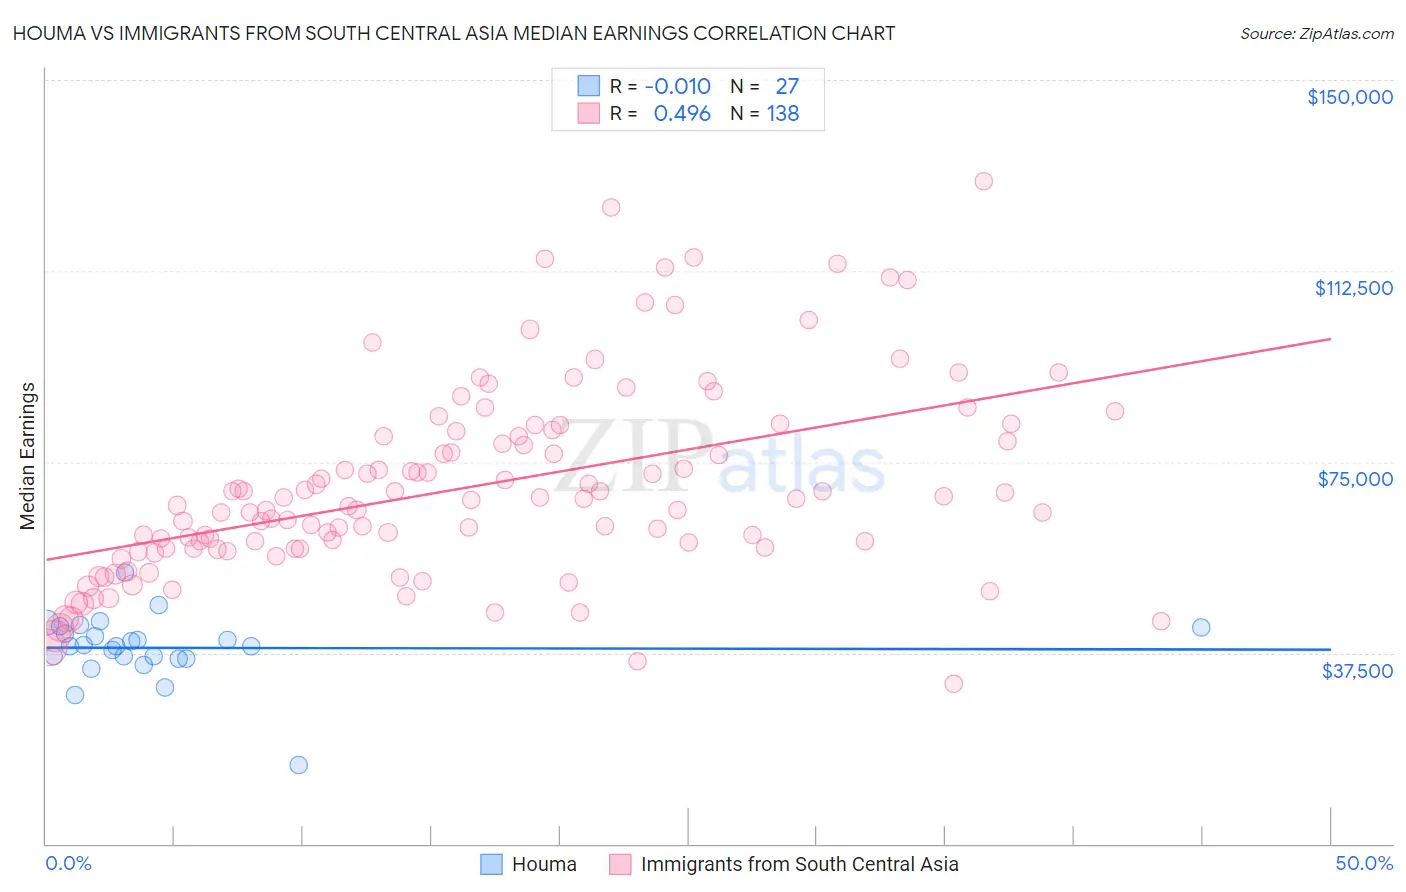 Houma vs Immigrants from South Central Asia Median Earnings